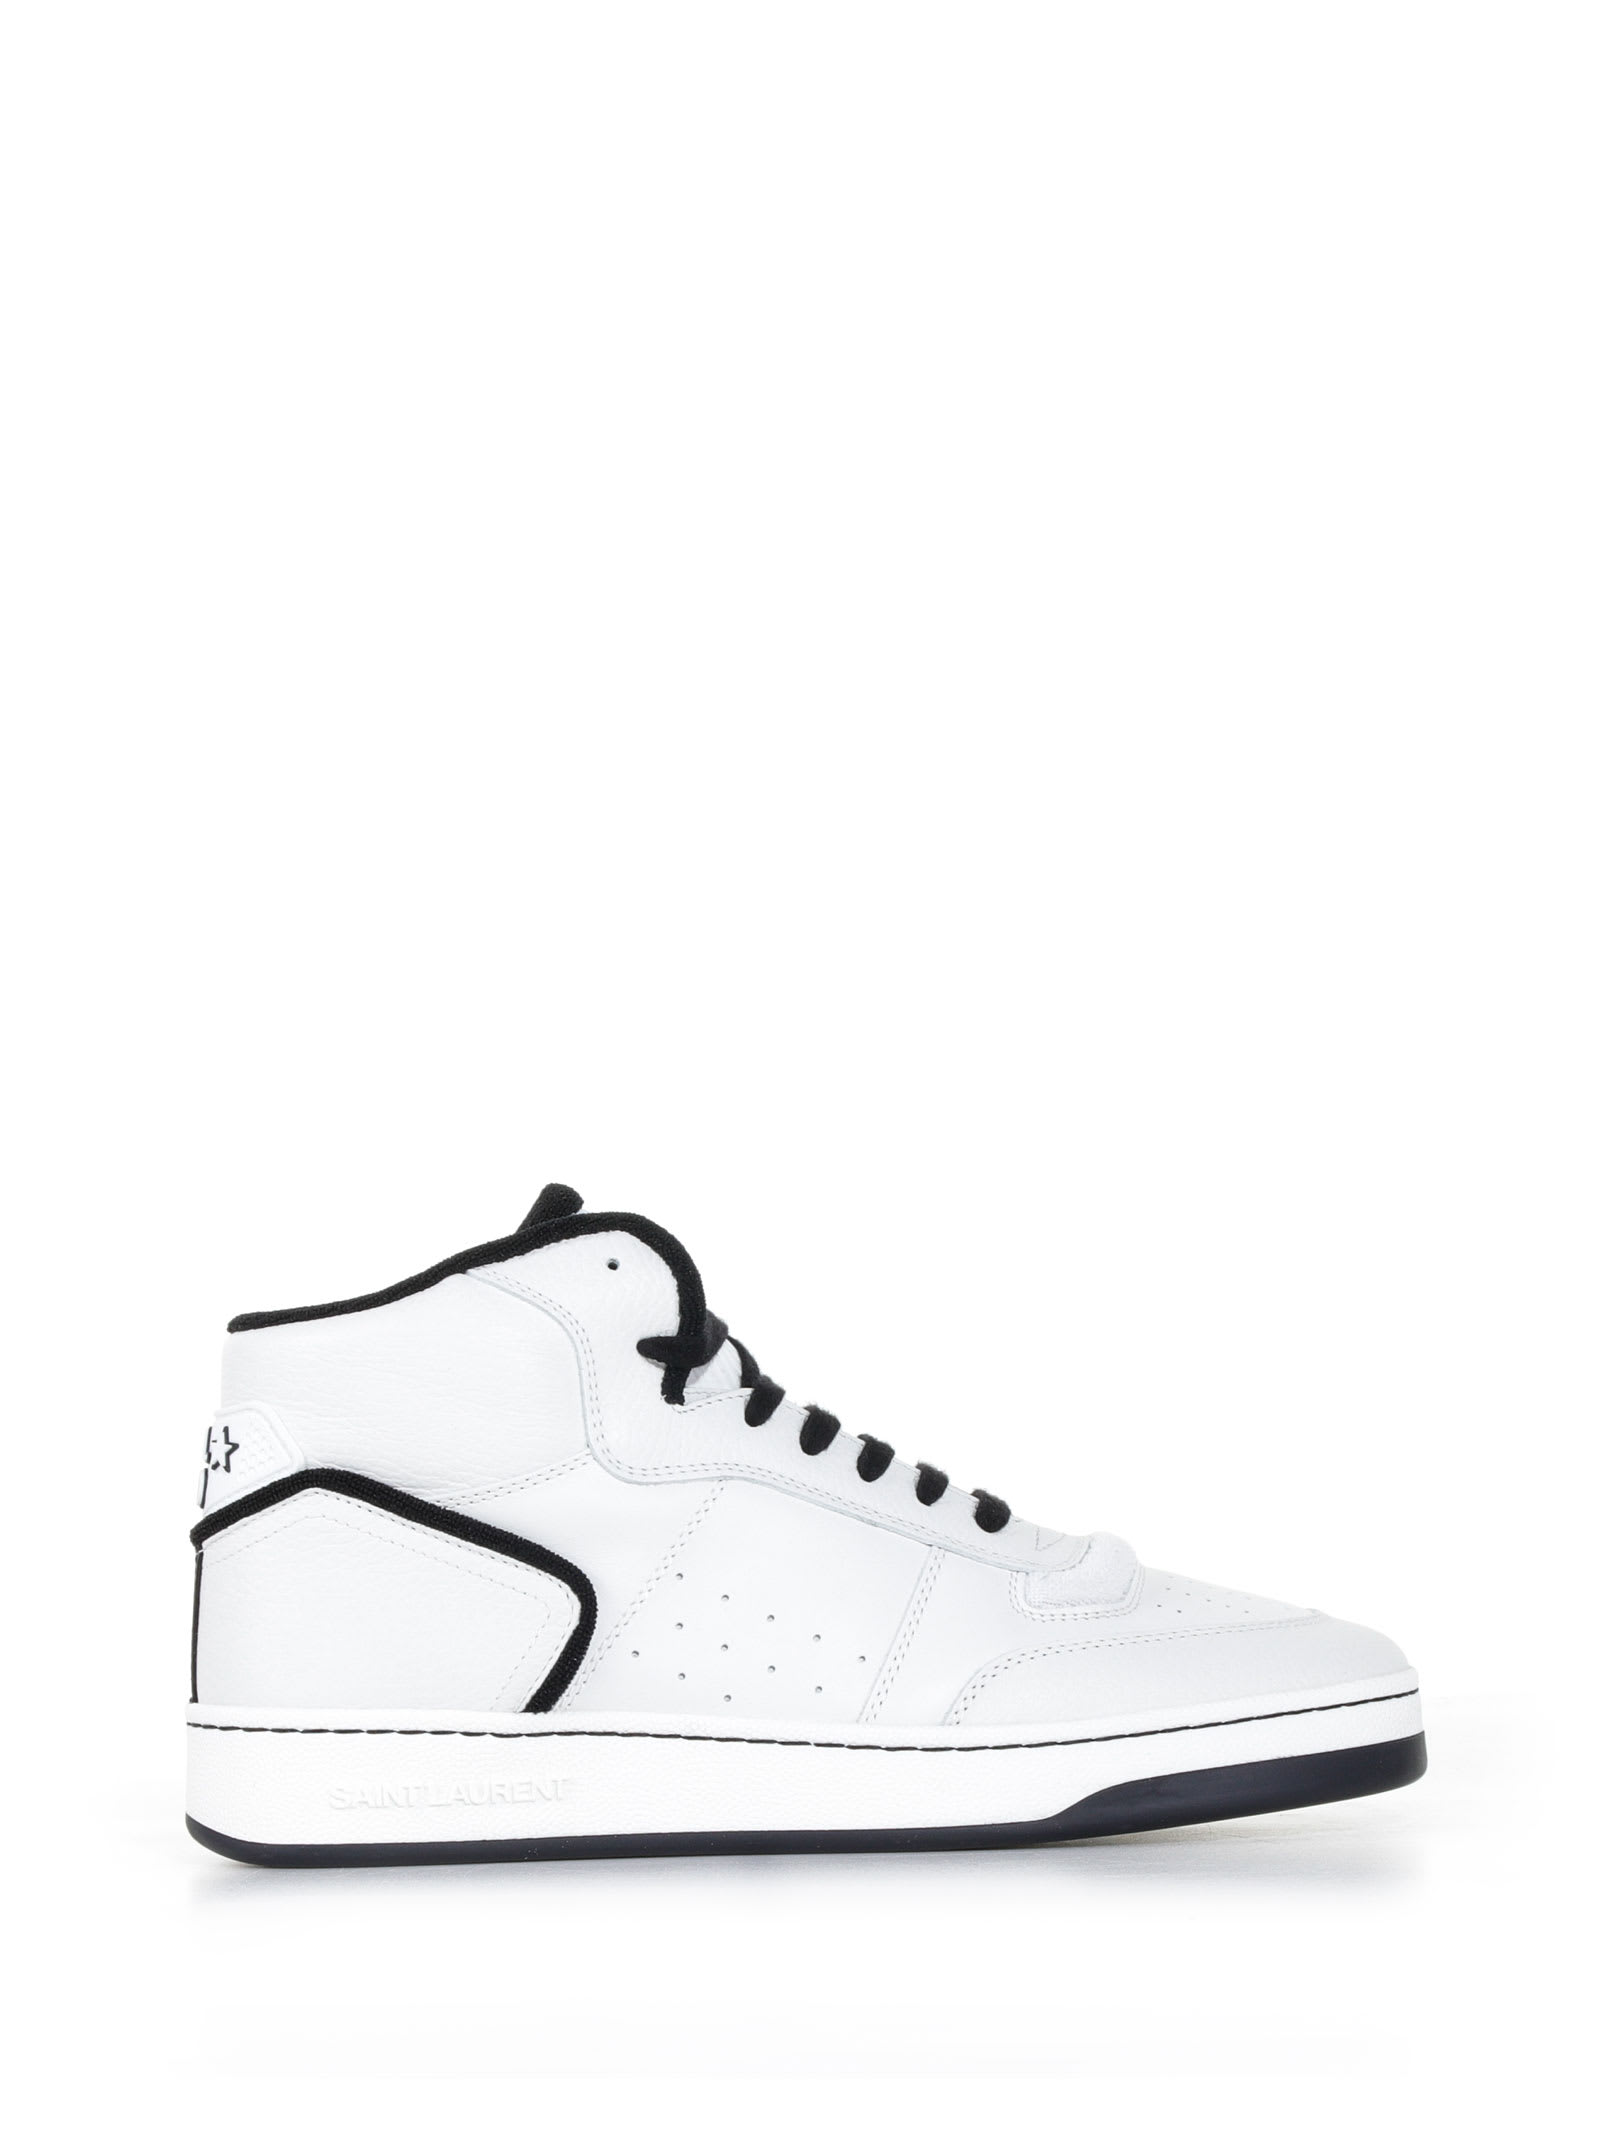 Saint Laurent Trainers With Contrasting Details In Blanc Opt